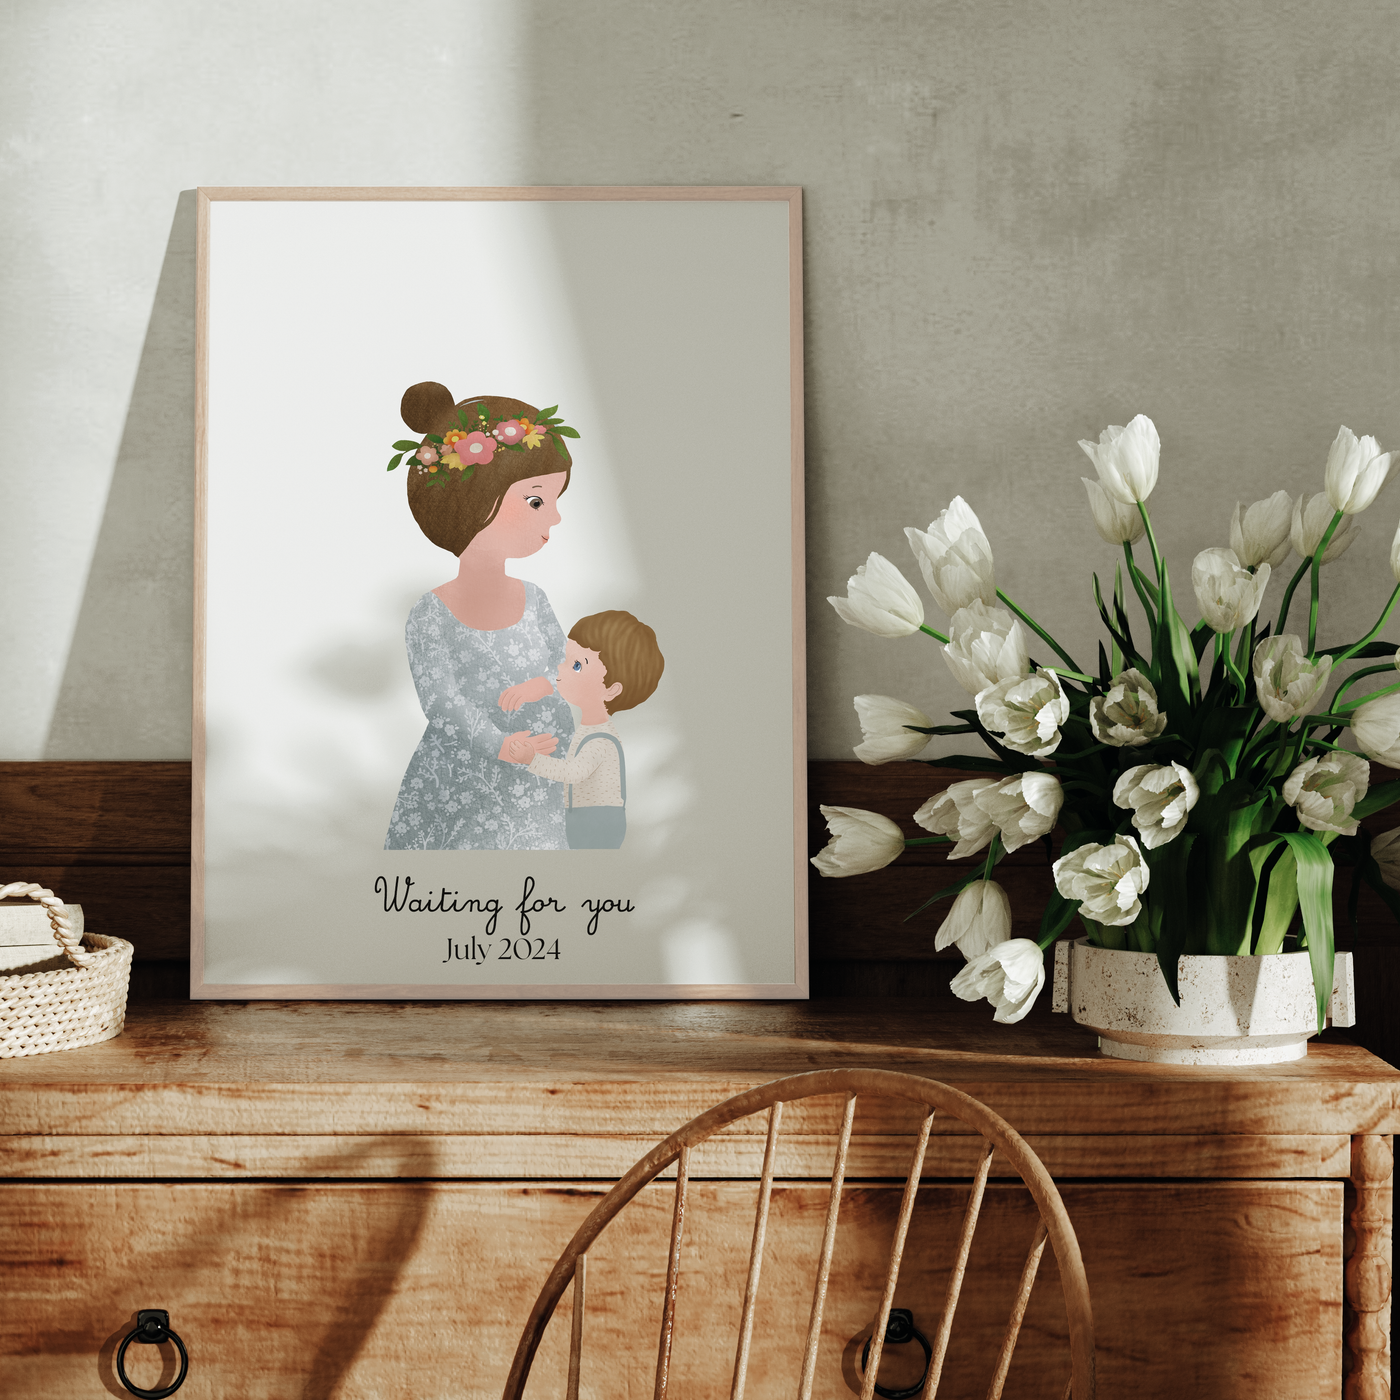 Expecting Mama + Littles Poster | Personalized Mother's Day Portrait (Frame Included)